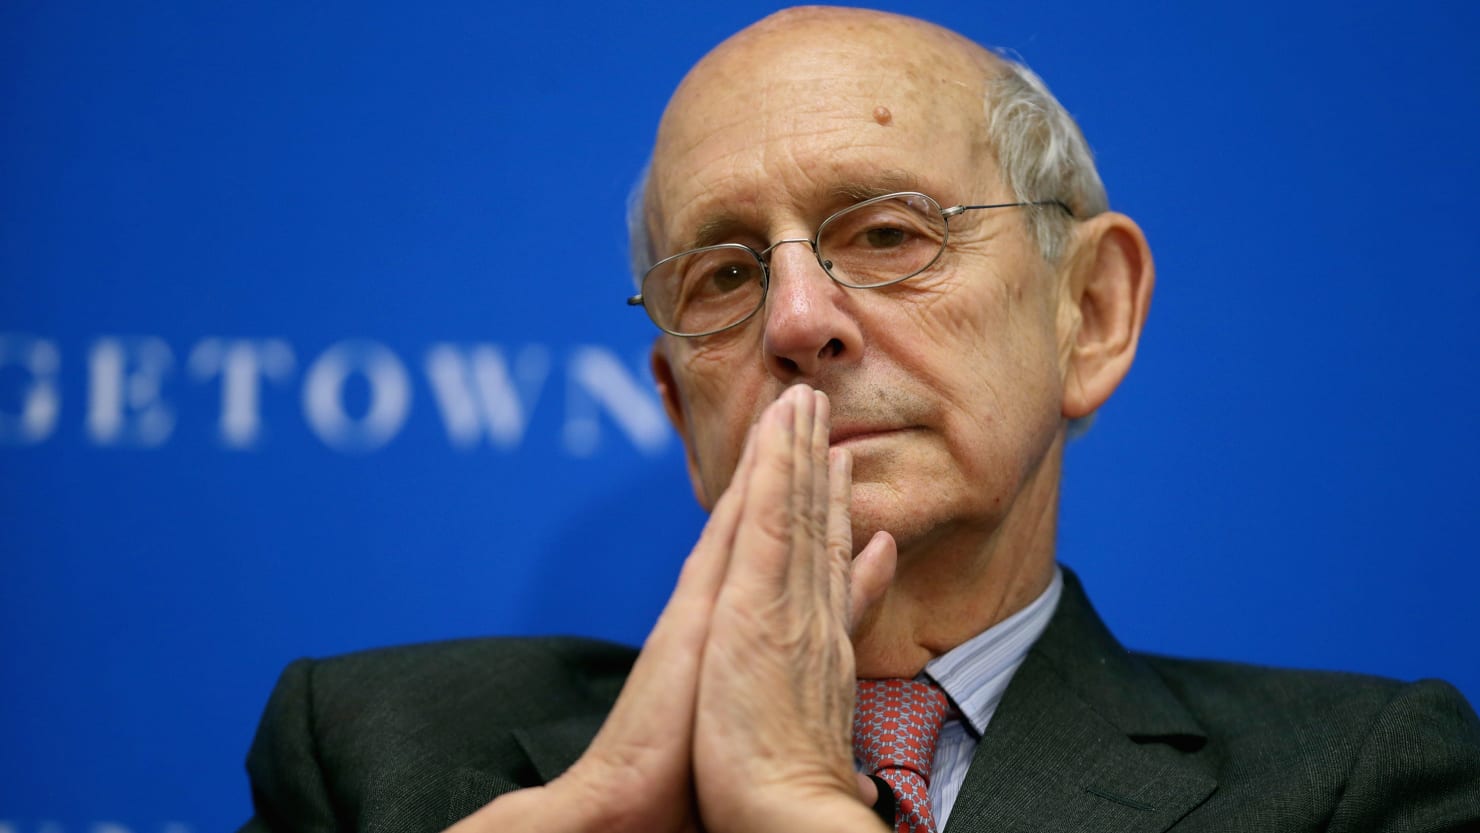 Stephen Breyer 'Sounds an Alarm' in New Interview on Supreme Court's Future